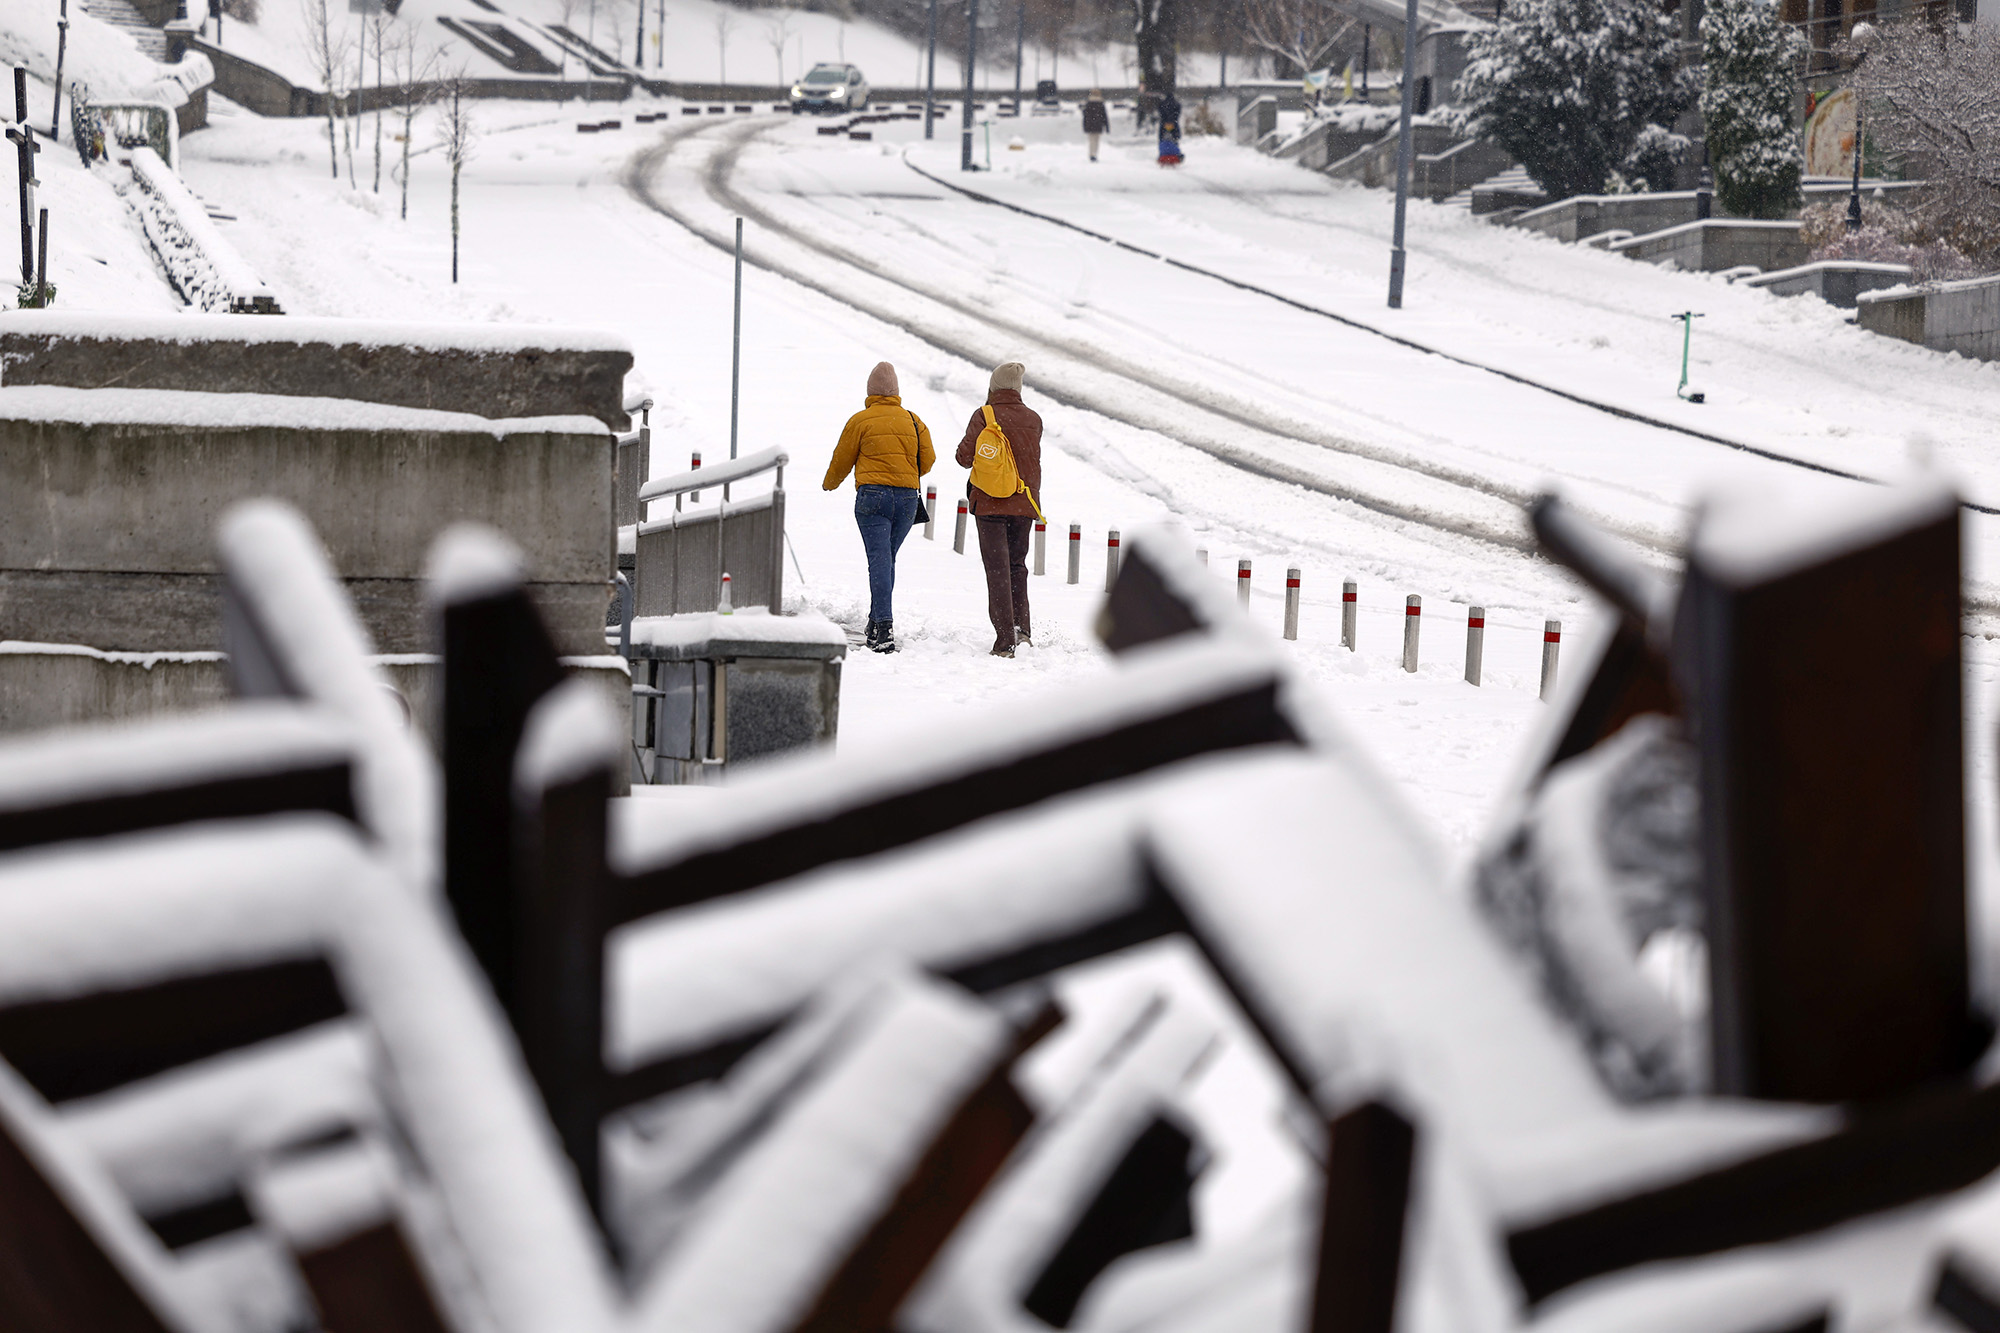 People walk along a snow-covered street on November 19, in Kyiv, Ukraine.